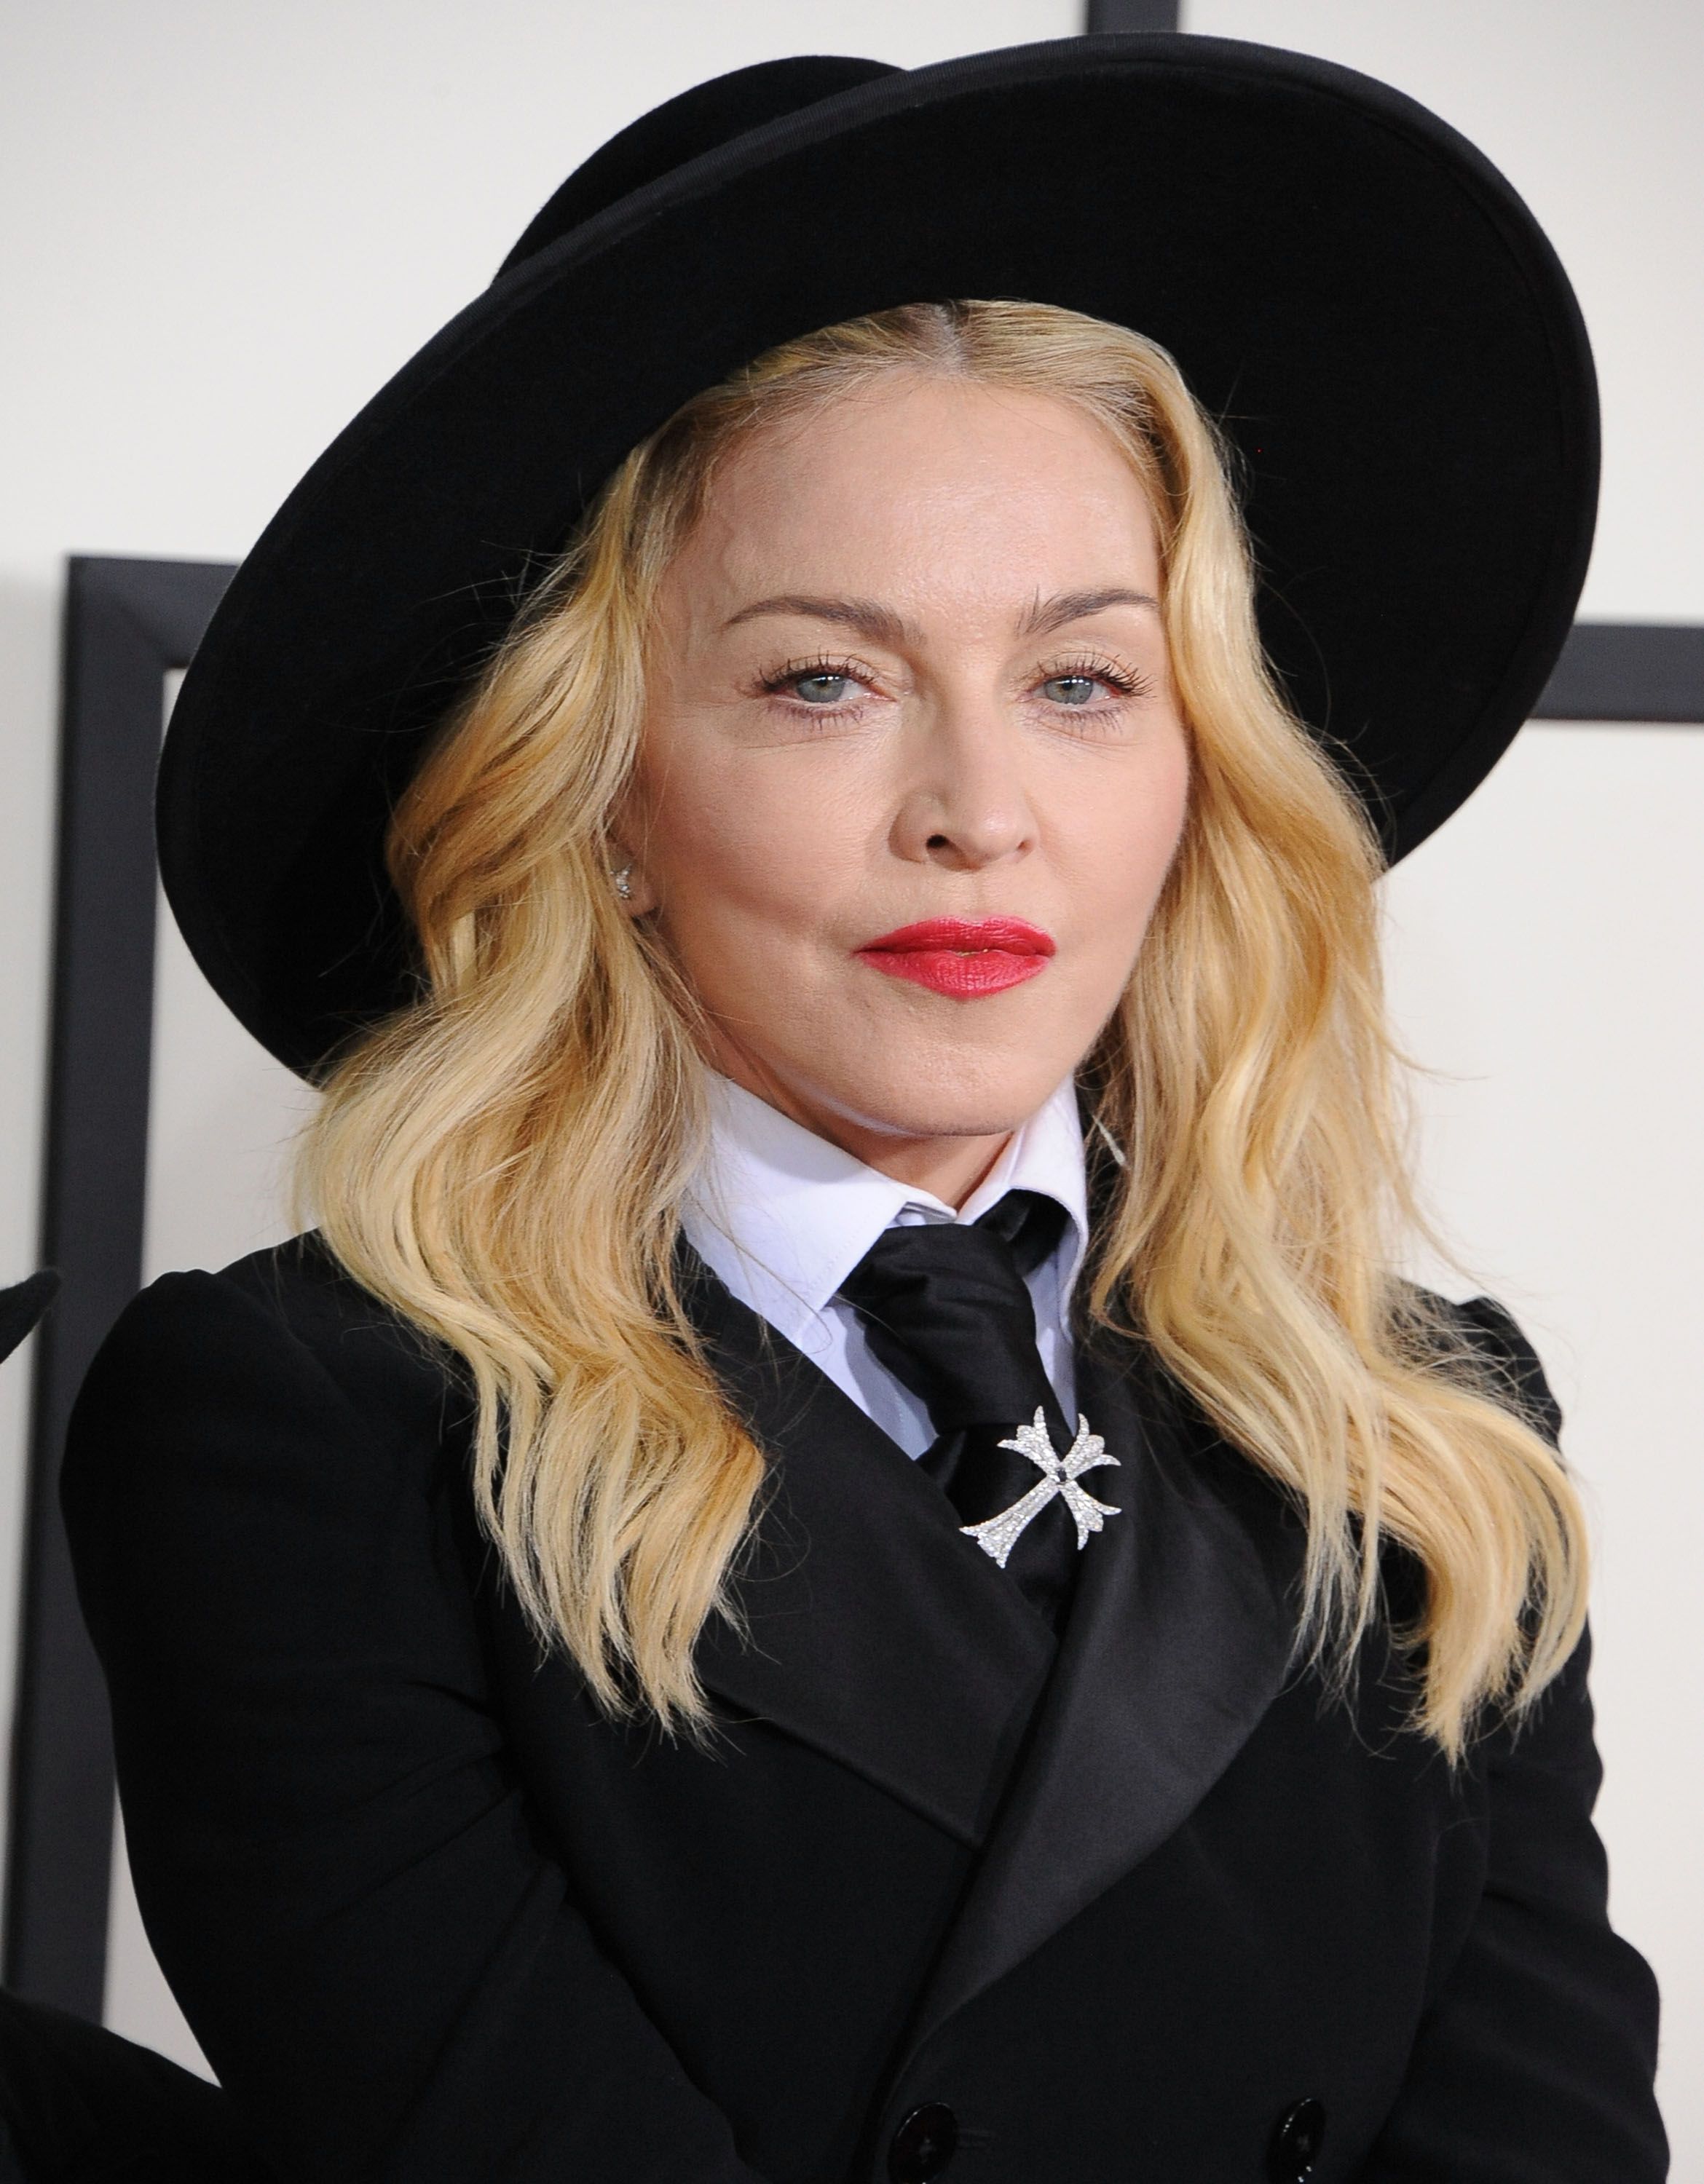 Madonna at the 56th GRAMMY Awards on January 26, 2014 in Los Angeles, California. | Photo: Getty Images